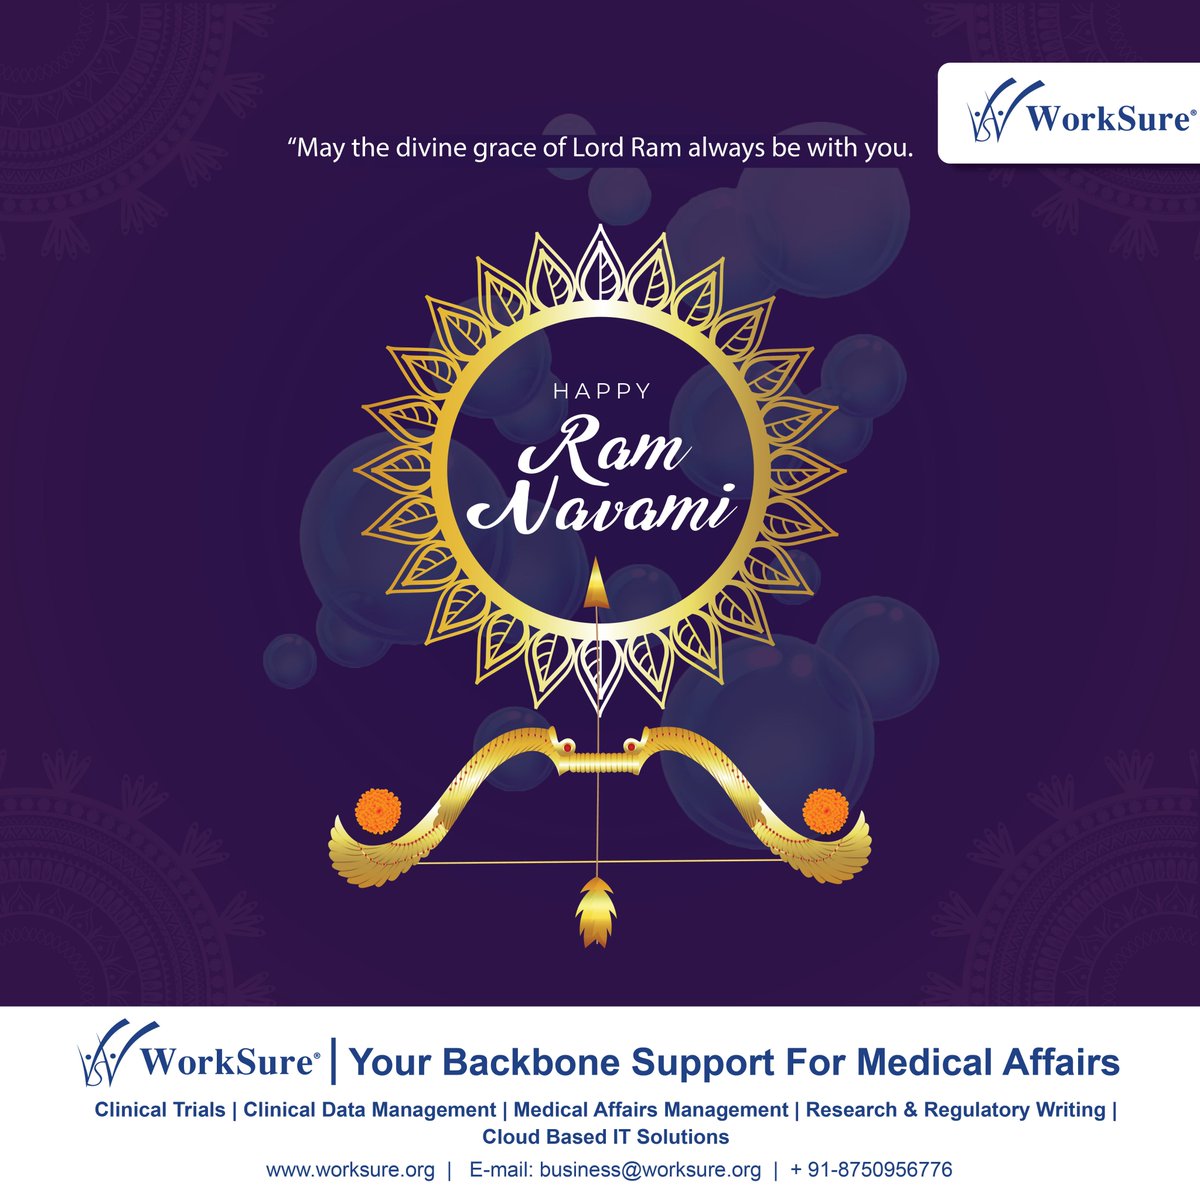 Let the festive spirit embrace you and your dear ones on this special occasion. Wishing you and your family a happy Maha Navami!

#worksure #medicomarketing #clinicaldatamanagement #clinicaltrials #kro #cro #medicalmanagement #ramnavami